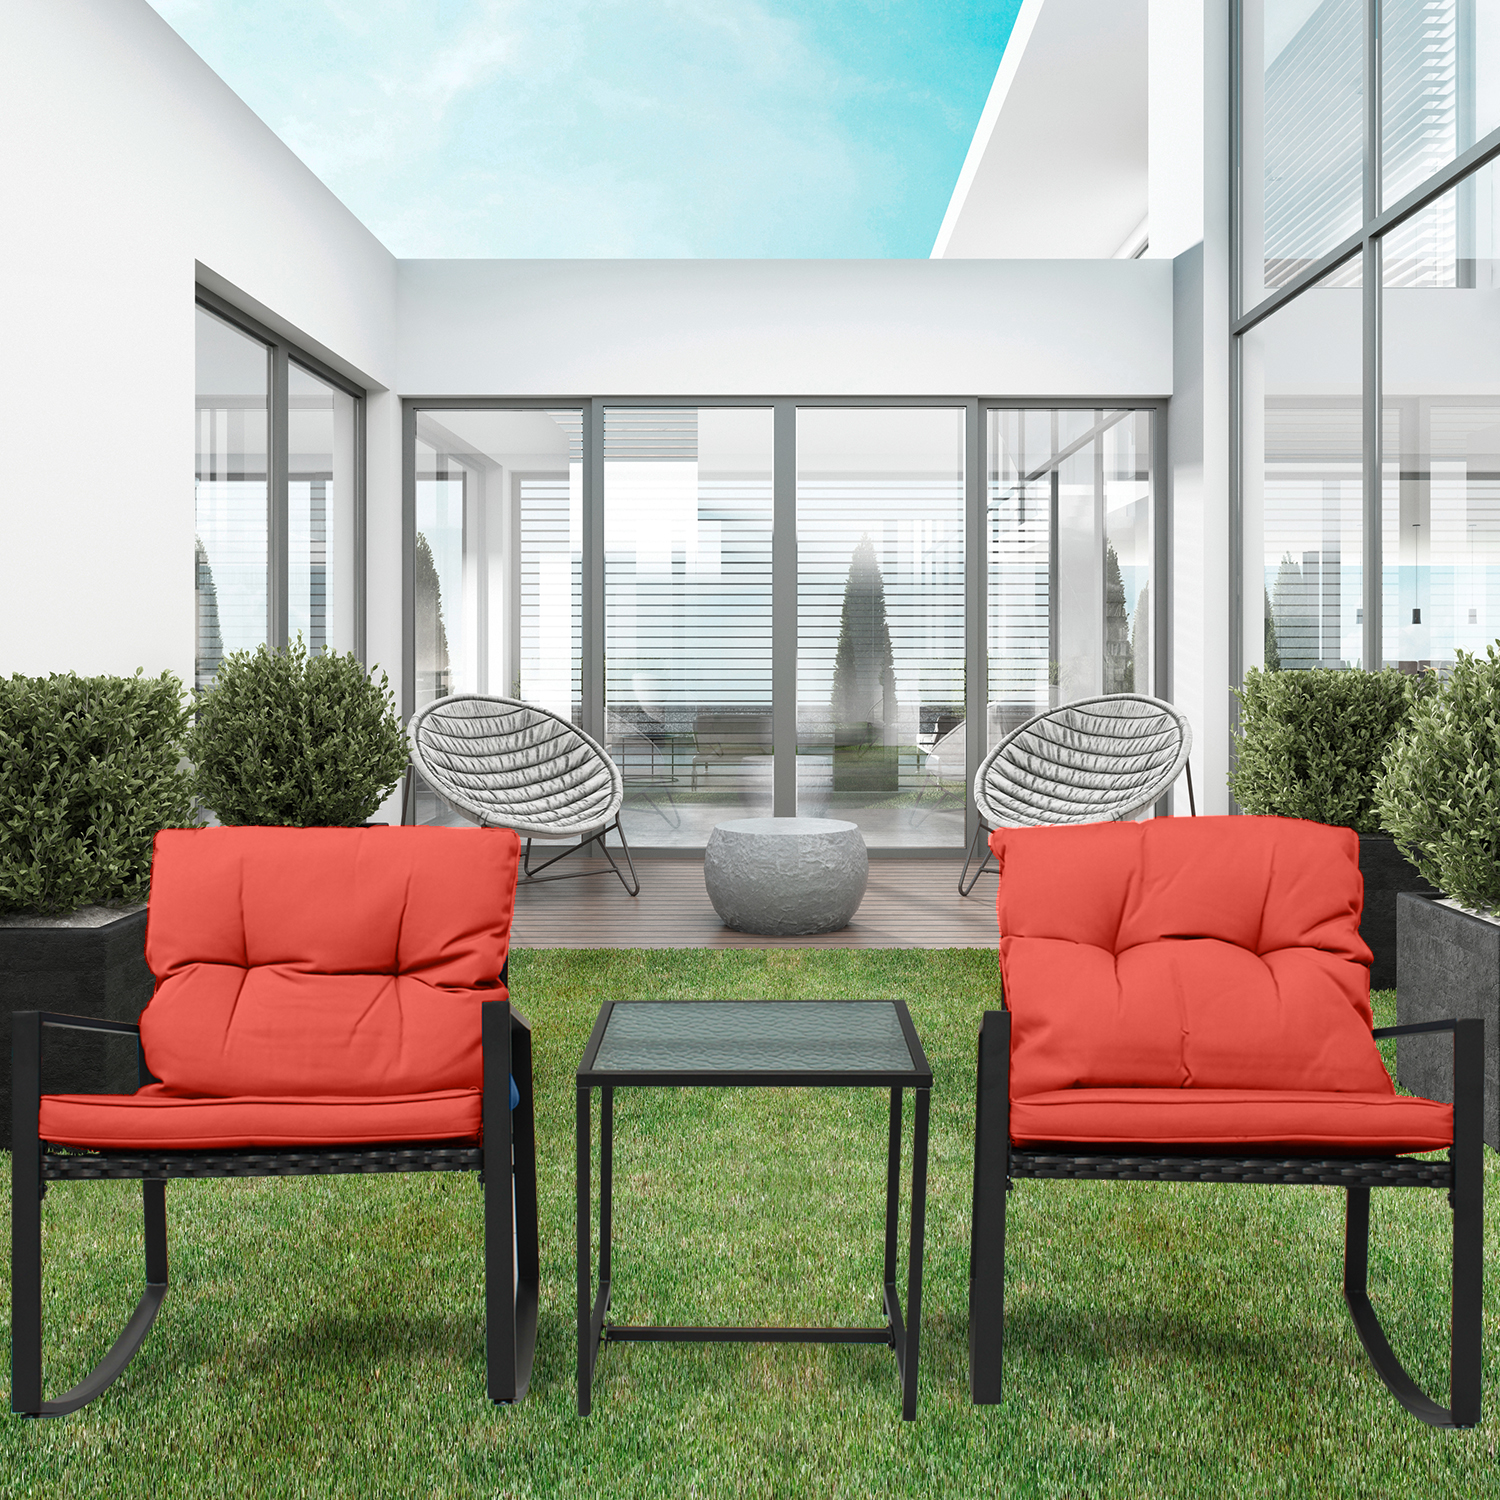 Patio 3-Piece Rocking&nbsp;Rocking Chair Set: Black Wicker Furniture-Two Chairs with Glass&nbsp;occasional&nbsp;Table - image 1 of 7